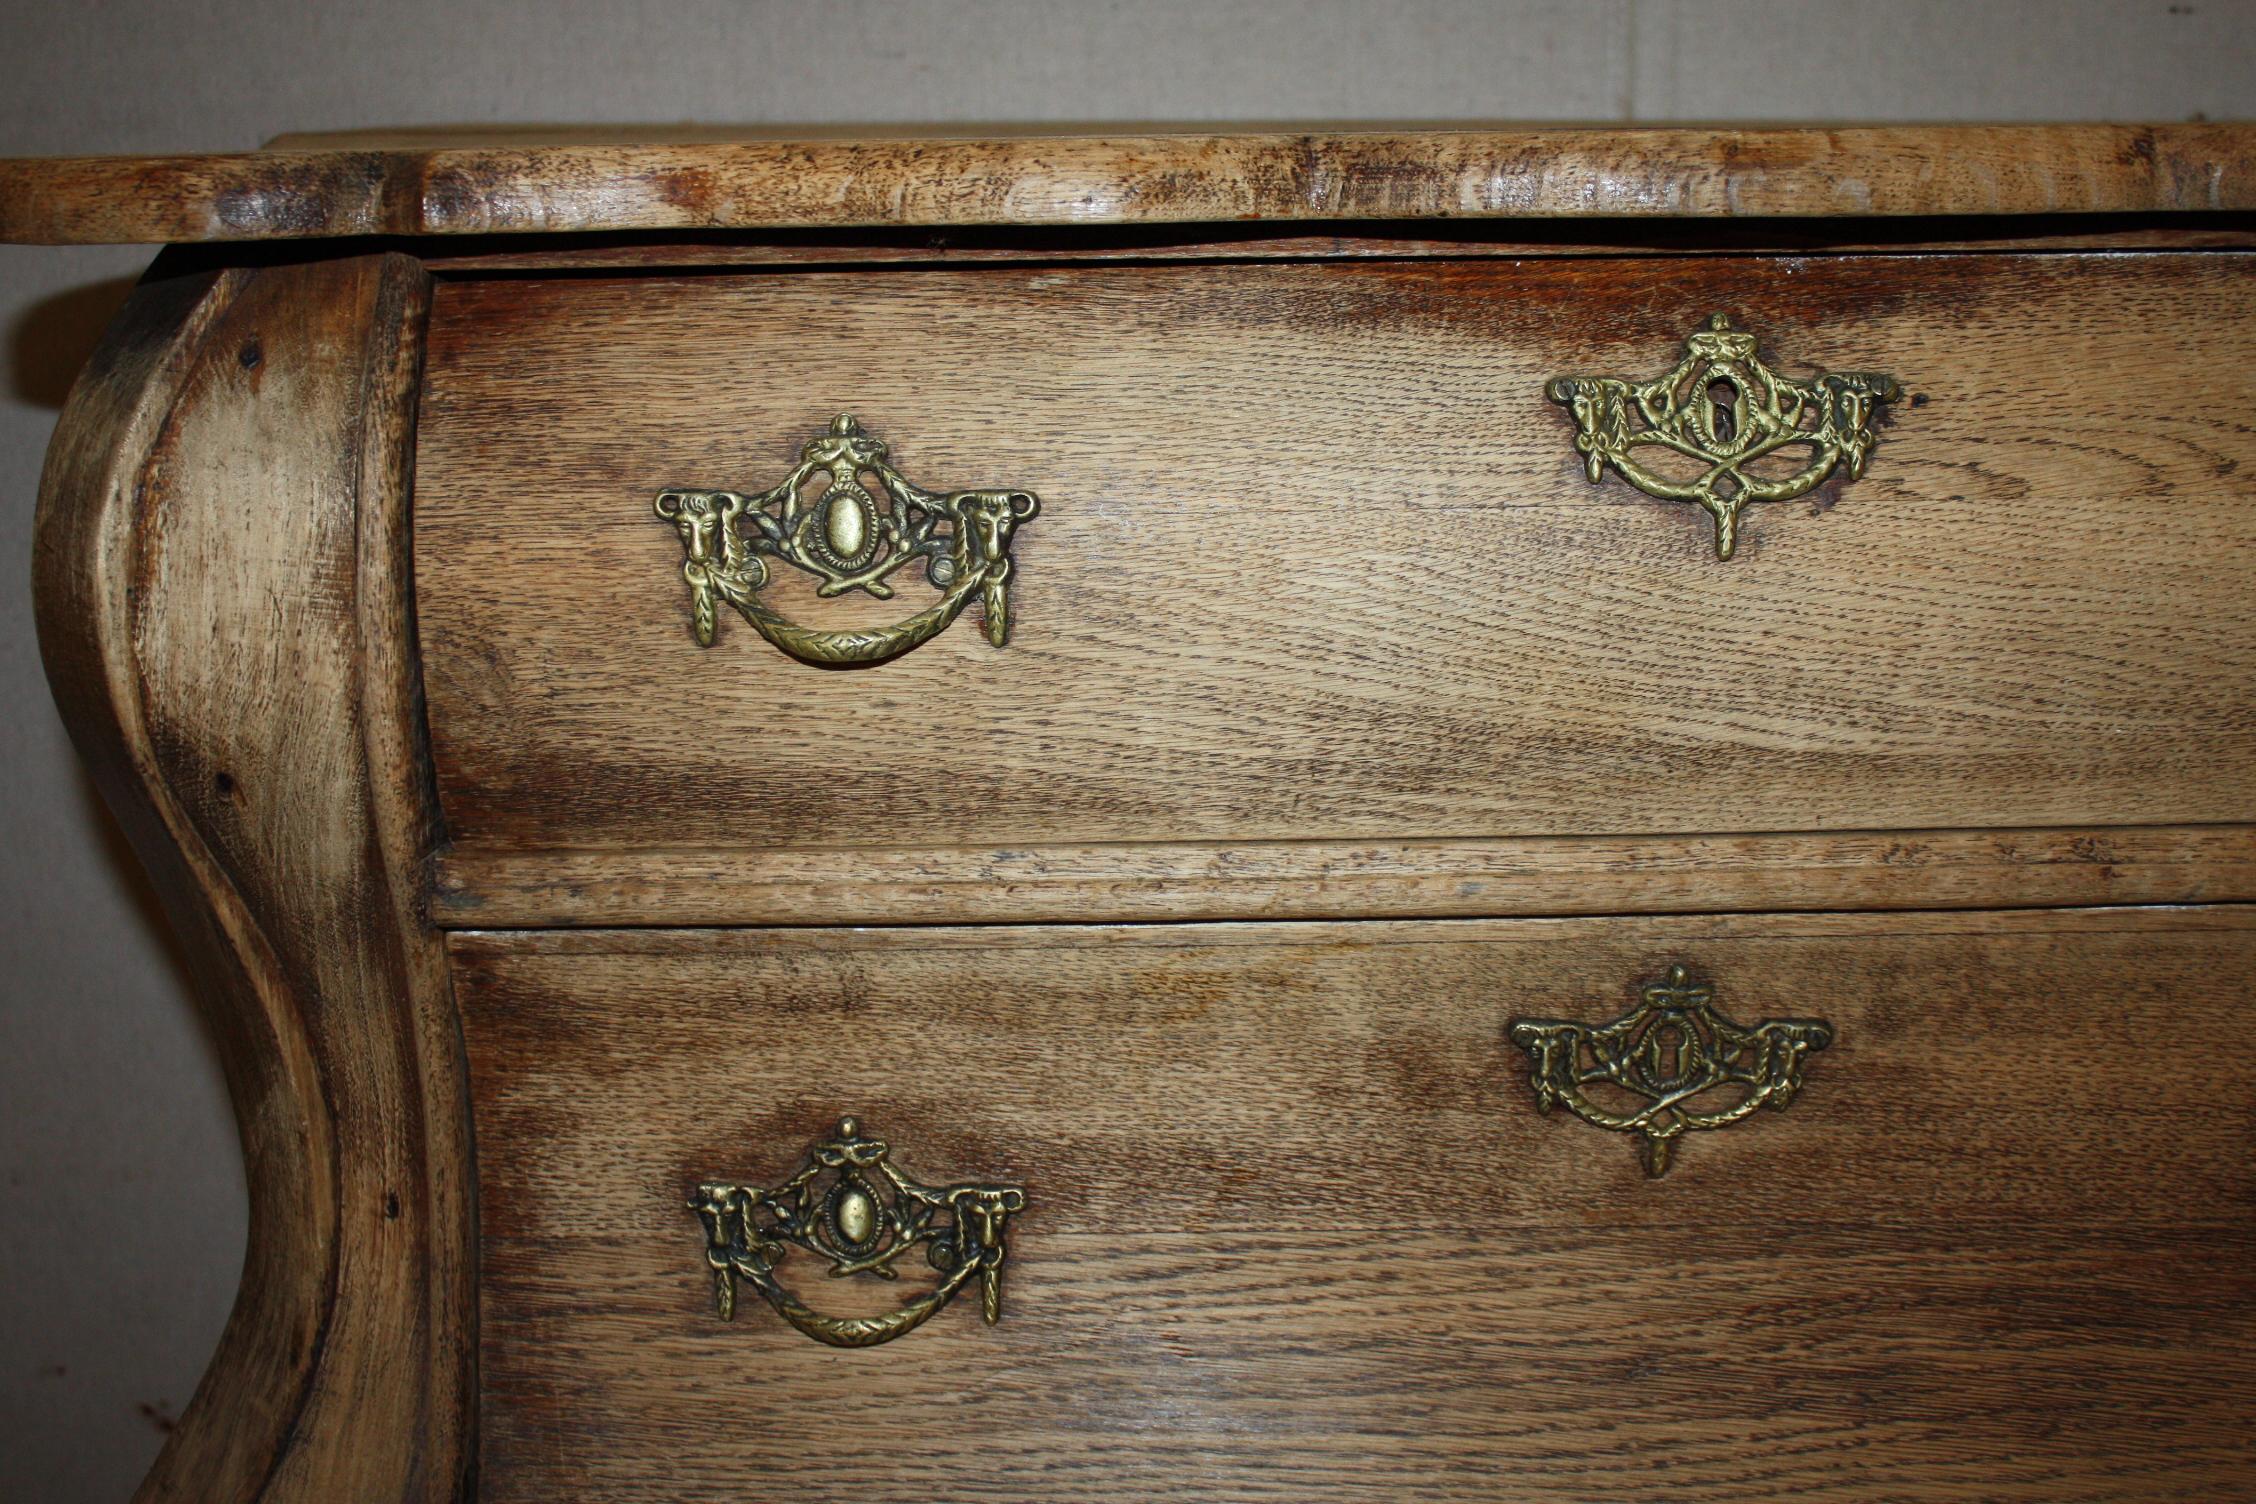 Small Bleached Oak Bombe Chest In Good Condition For Sale In Fairhope, AL